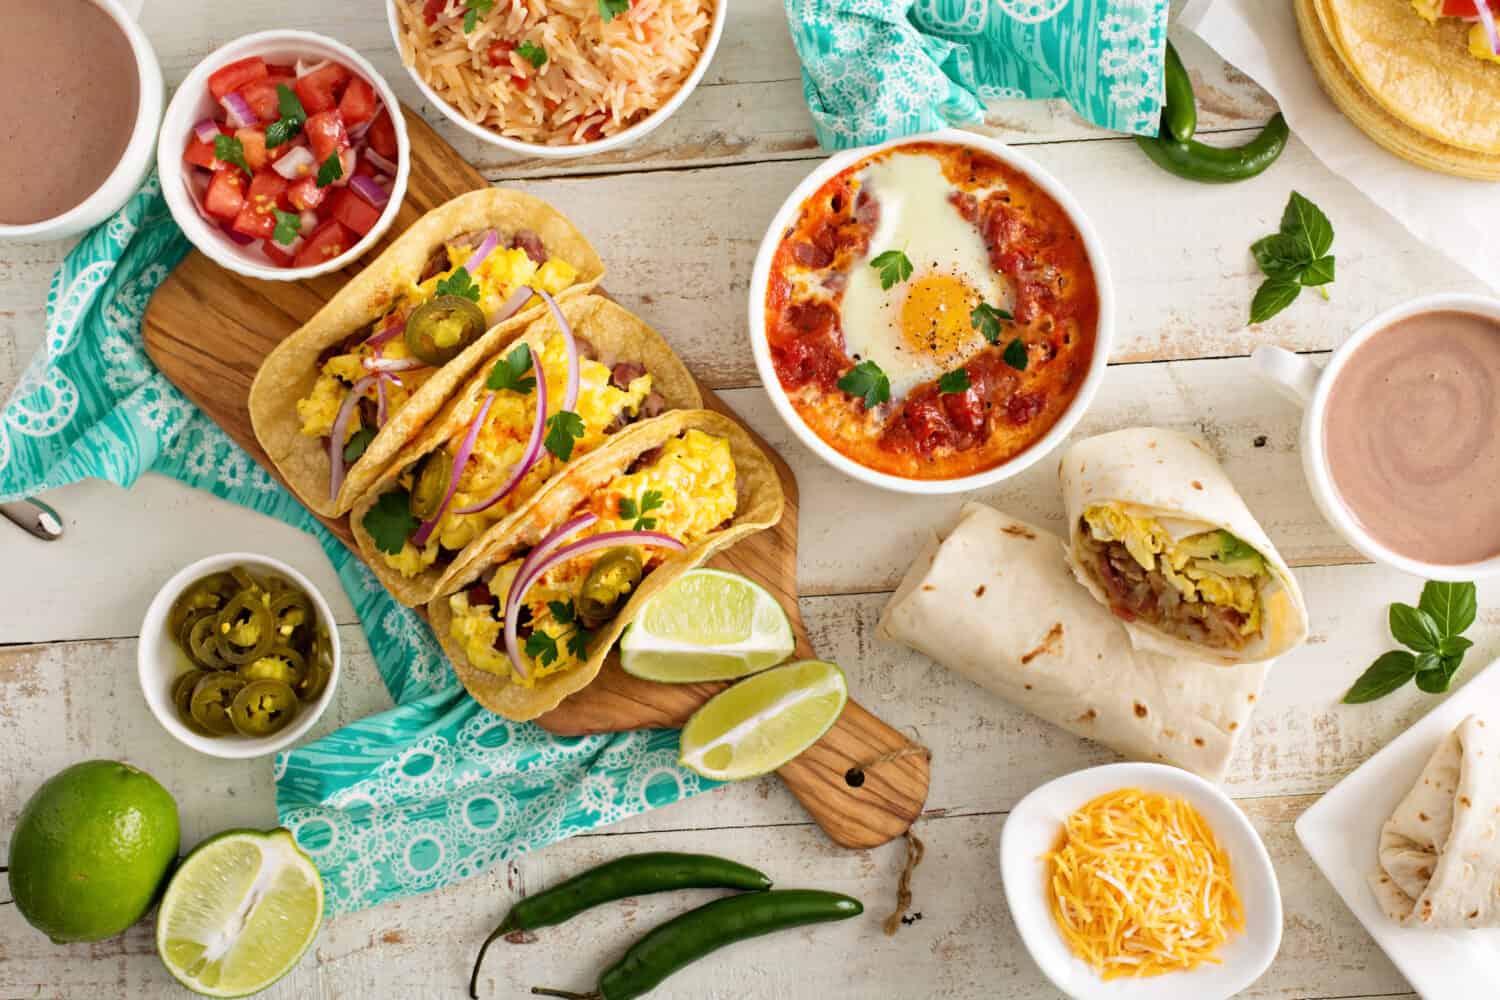 Tacos and burritos laid out with other classic Mexican fare.